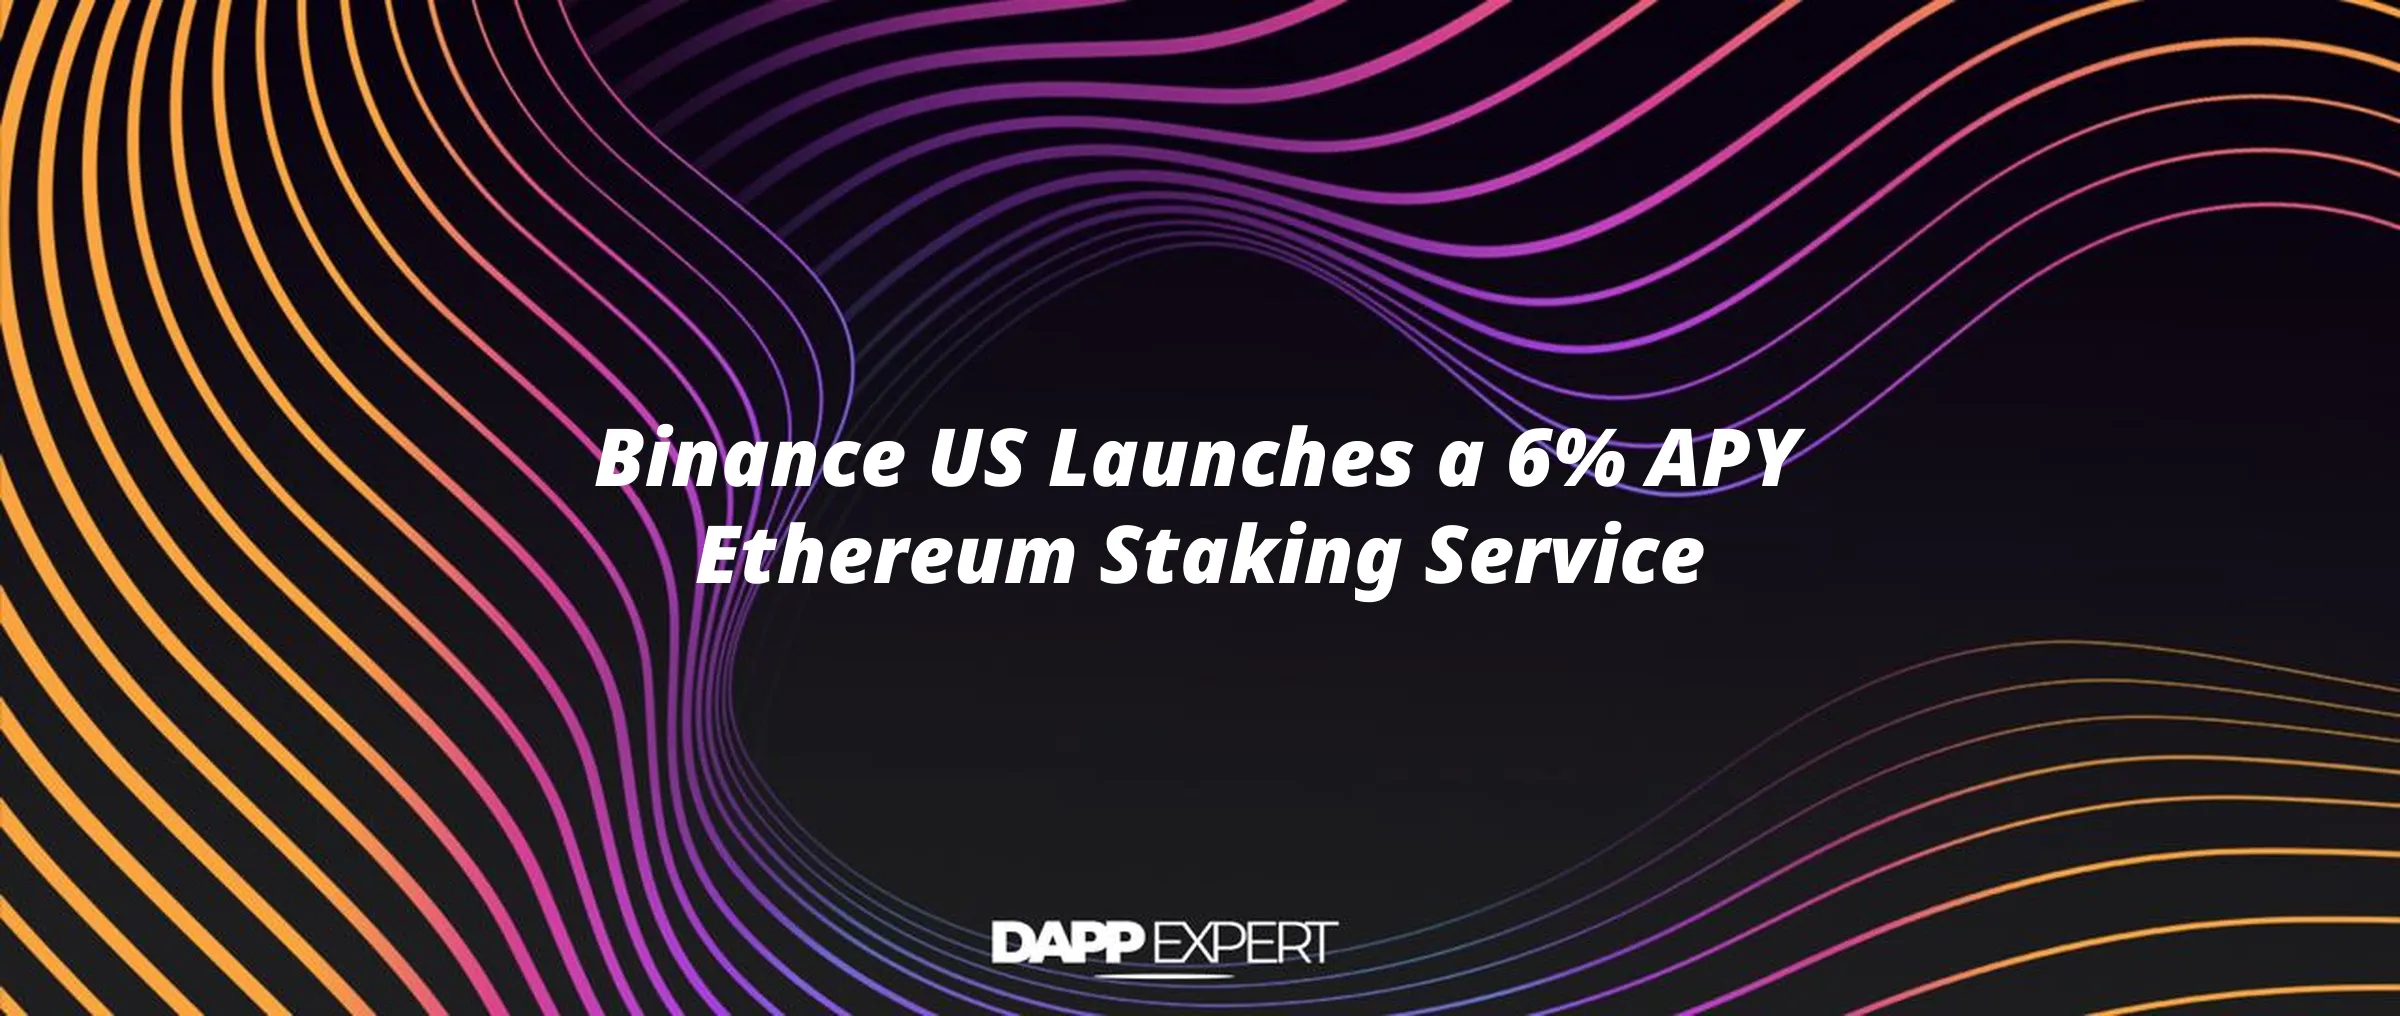 Binance US Launches a 6% APY Ethereum Staking Service